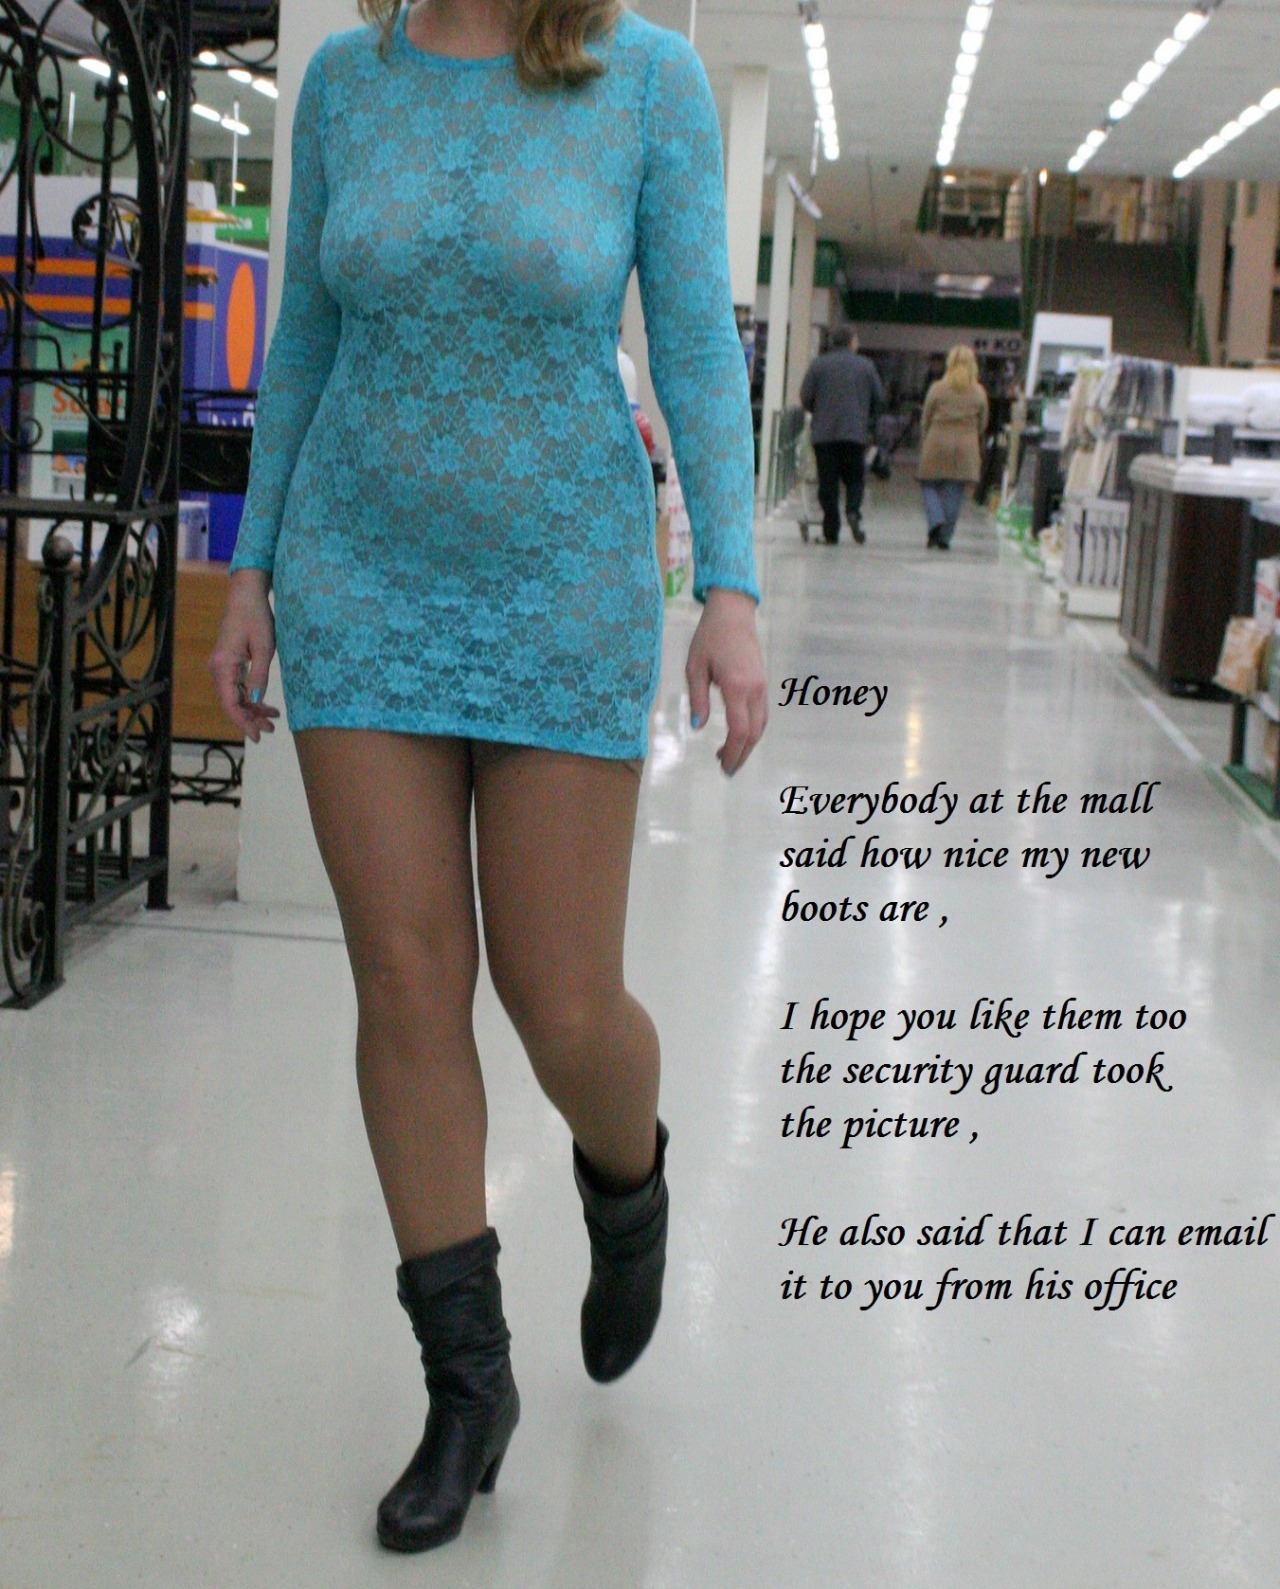 wearing see thru clothes in public cougar 3 on rus.sexviptube.com